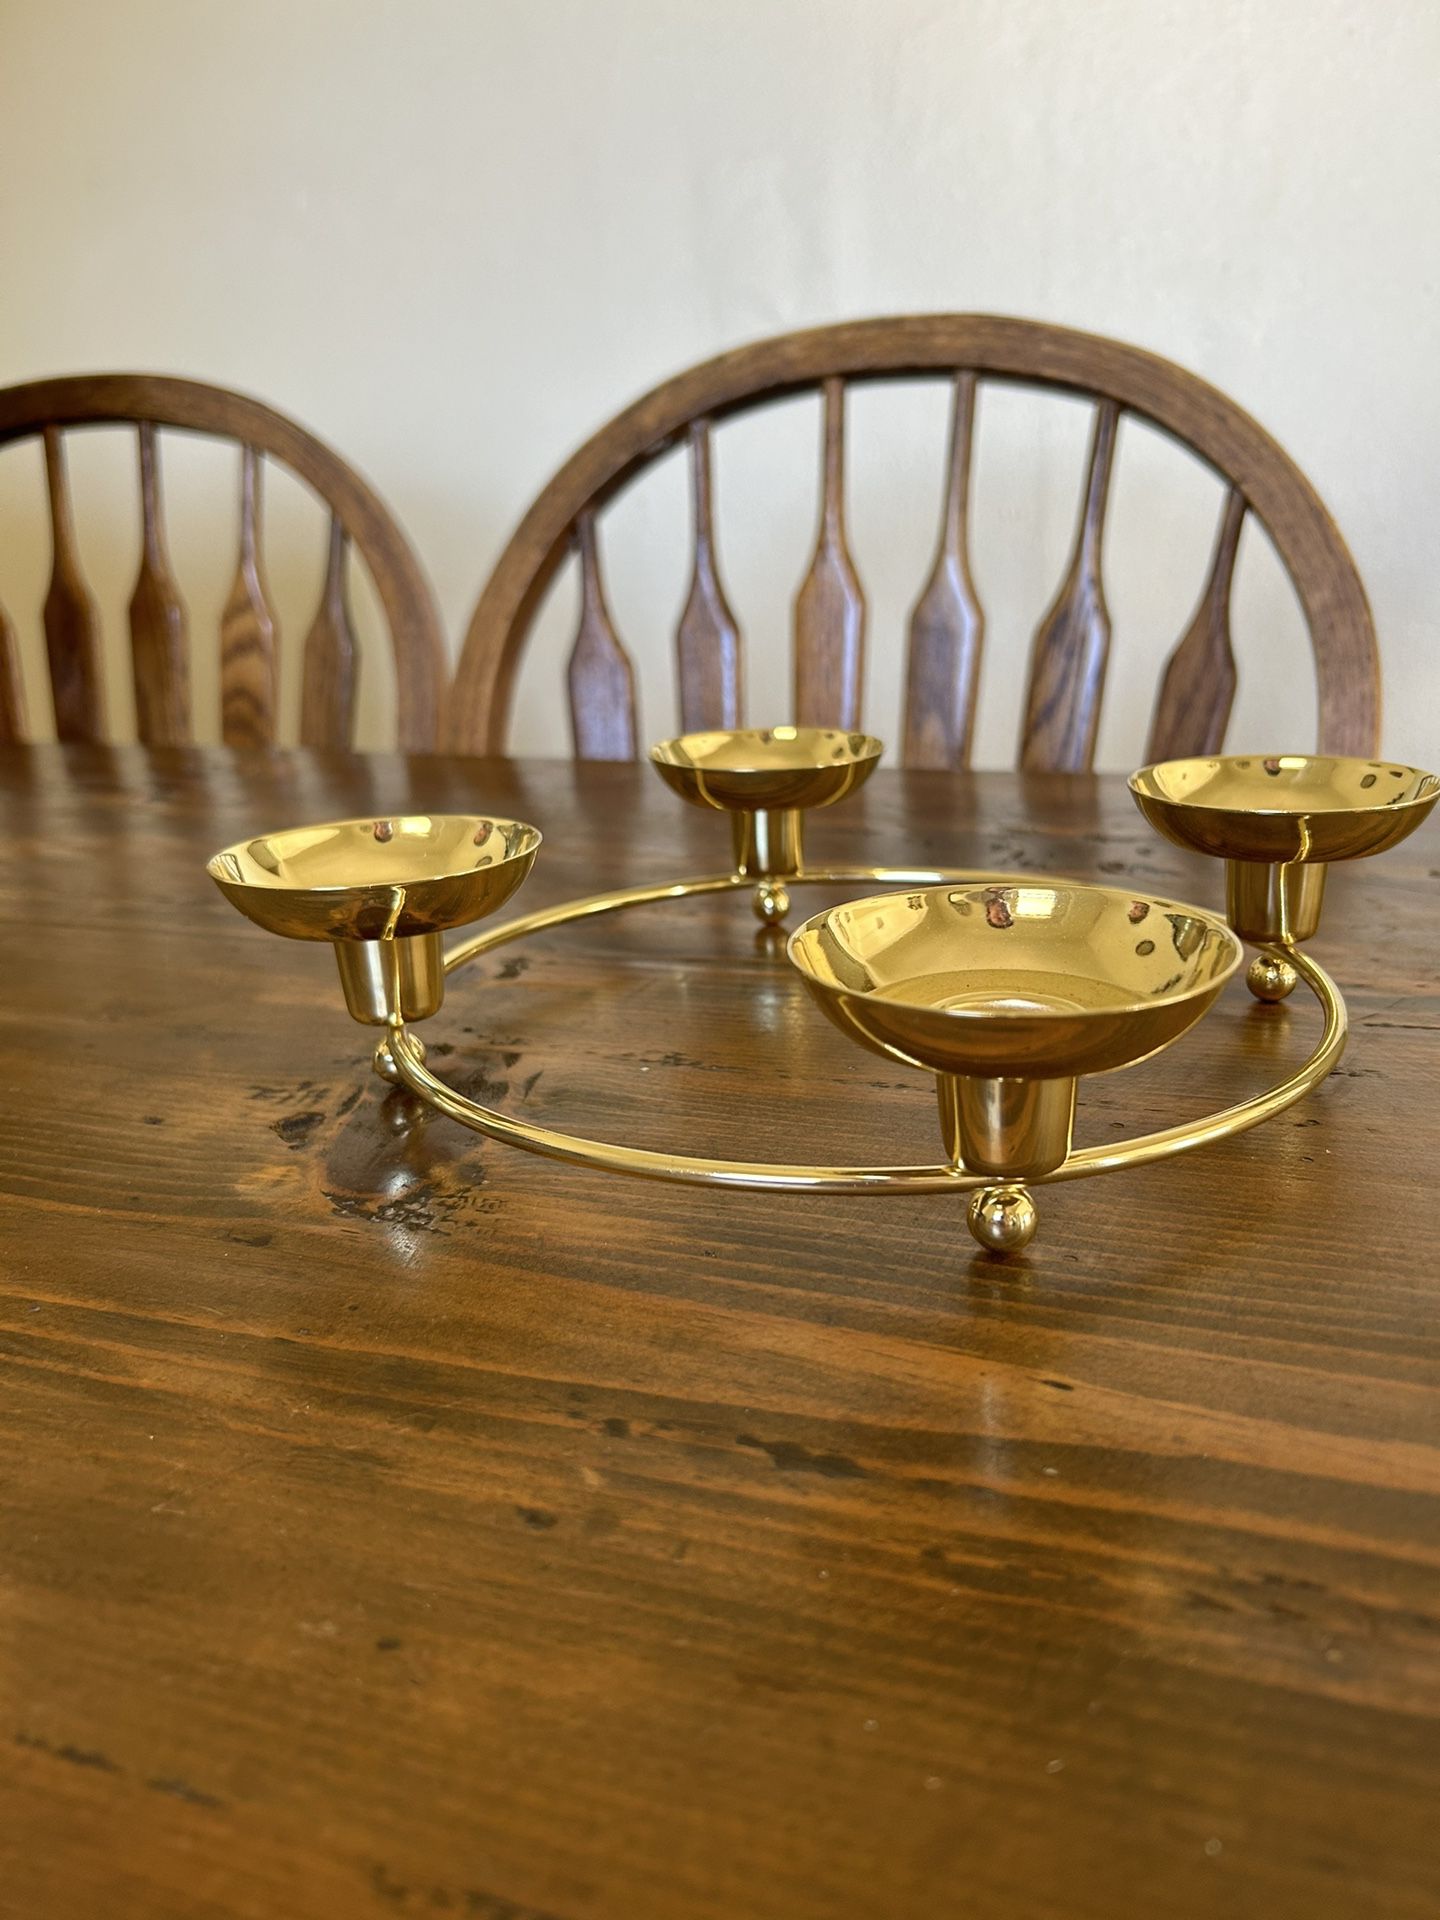 Partylite Candle Holder Shiny Brass